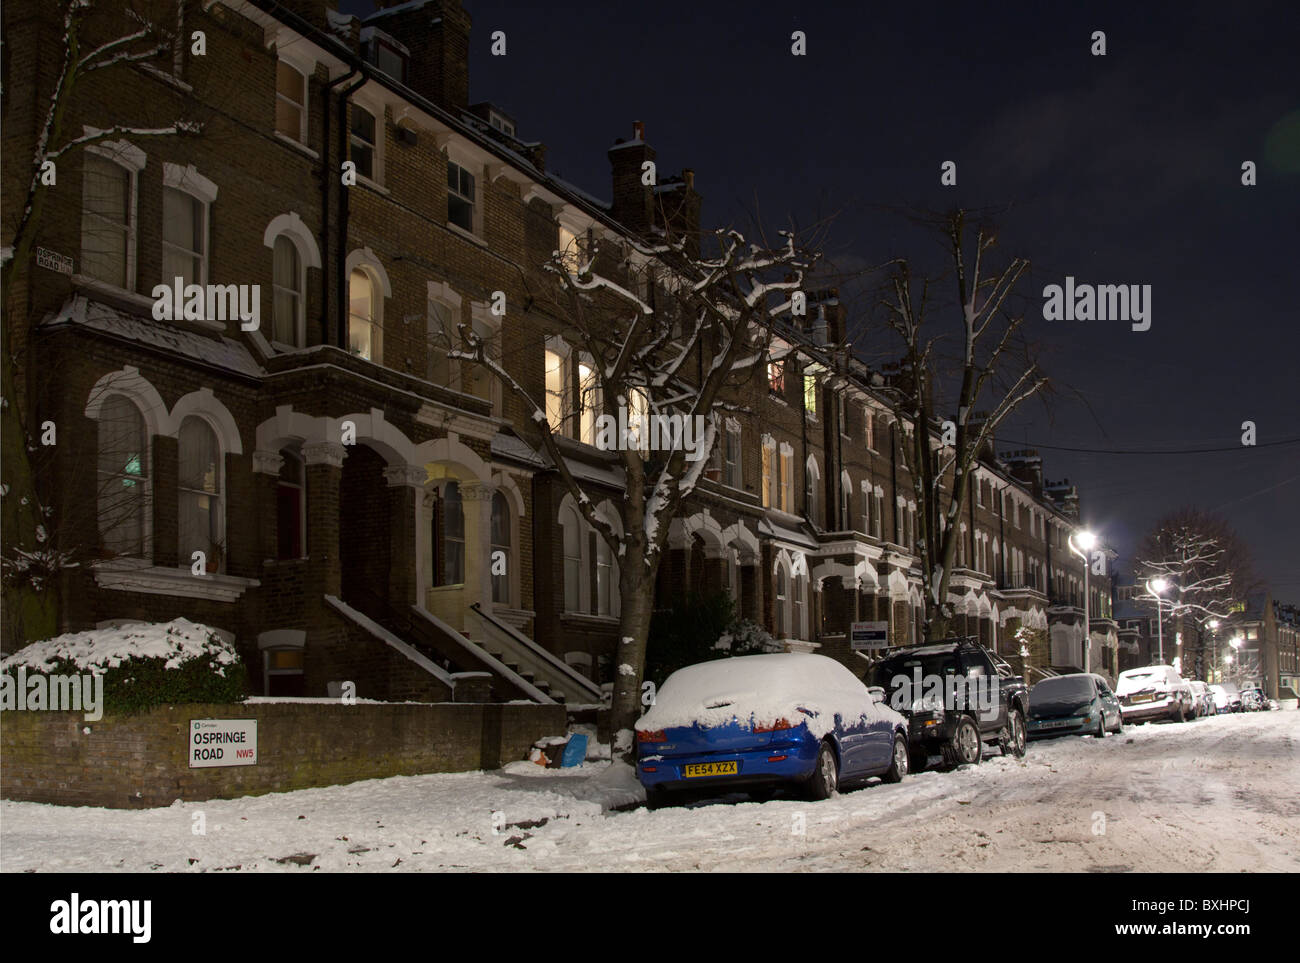 Victorian Terraced Houses - Ospringe Road NW5 - Camden - London Stock Photo